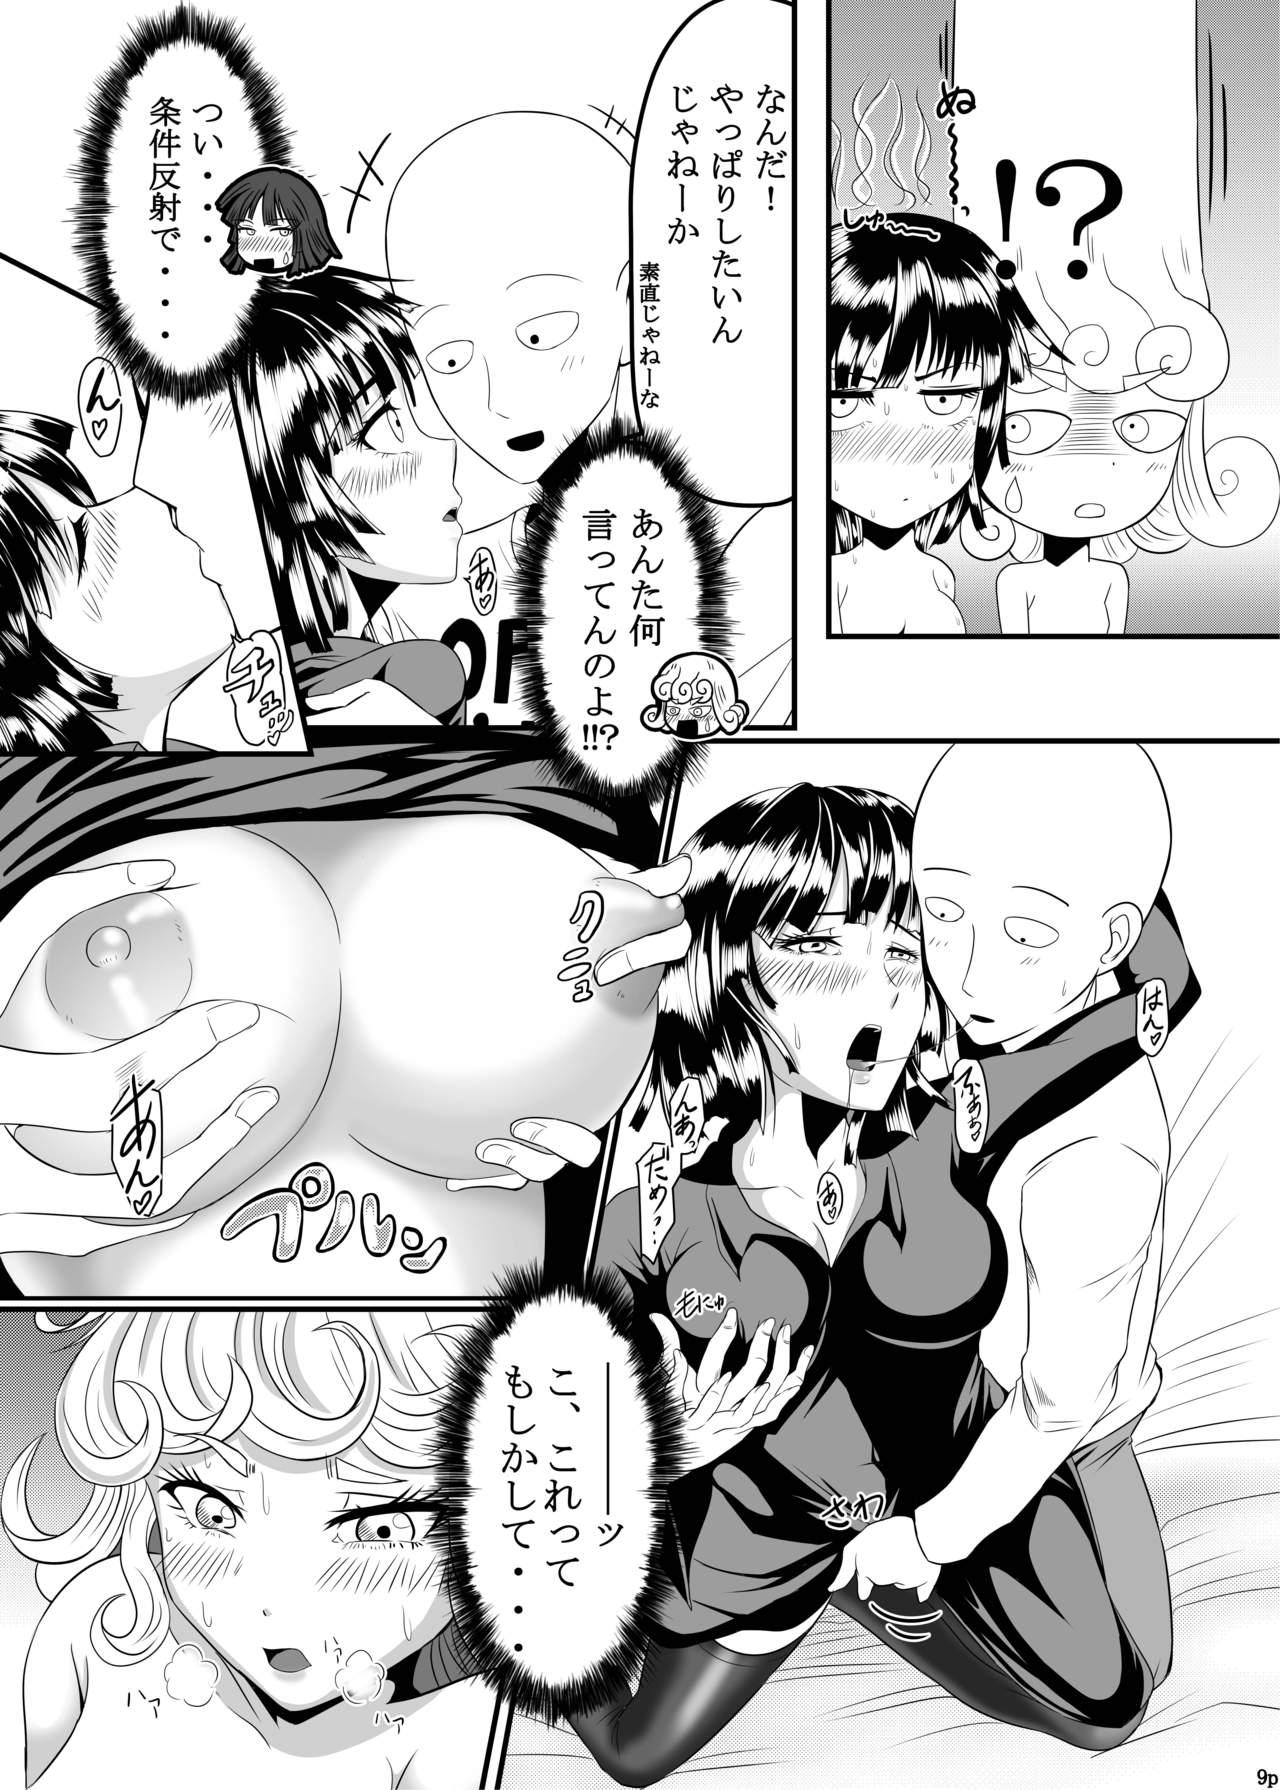 Shemale Dekoboko Love sister - One punch man  - Page 9